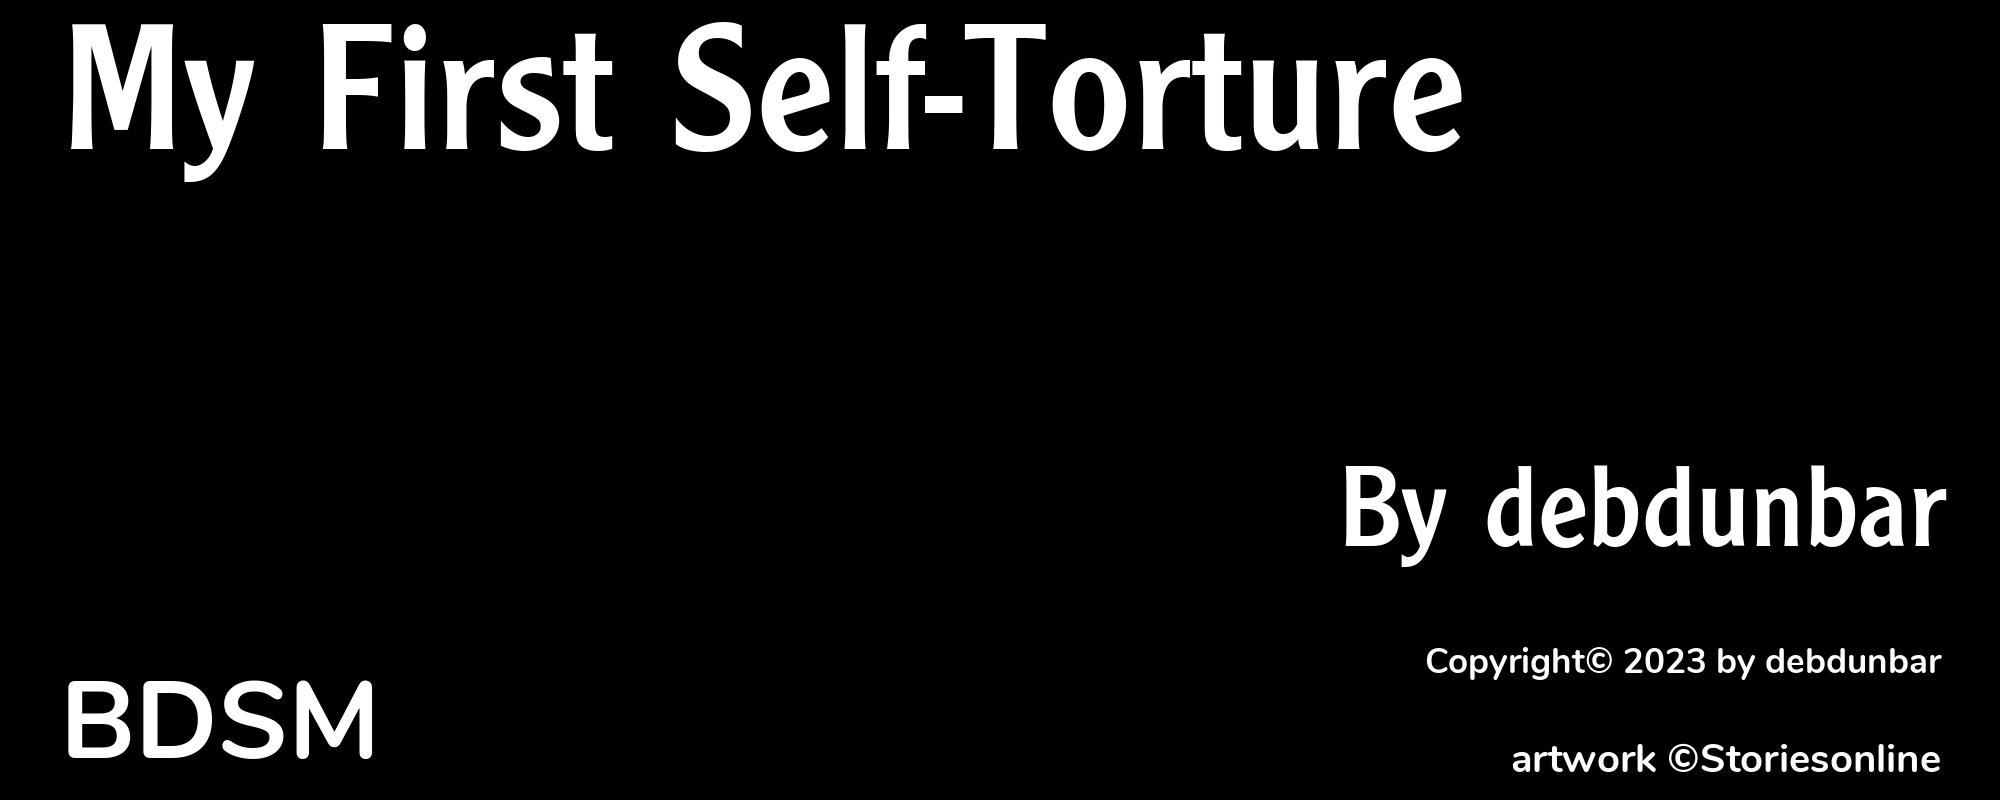 My First Self-Torture - Cover